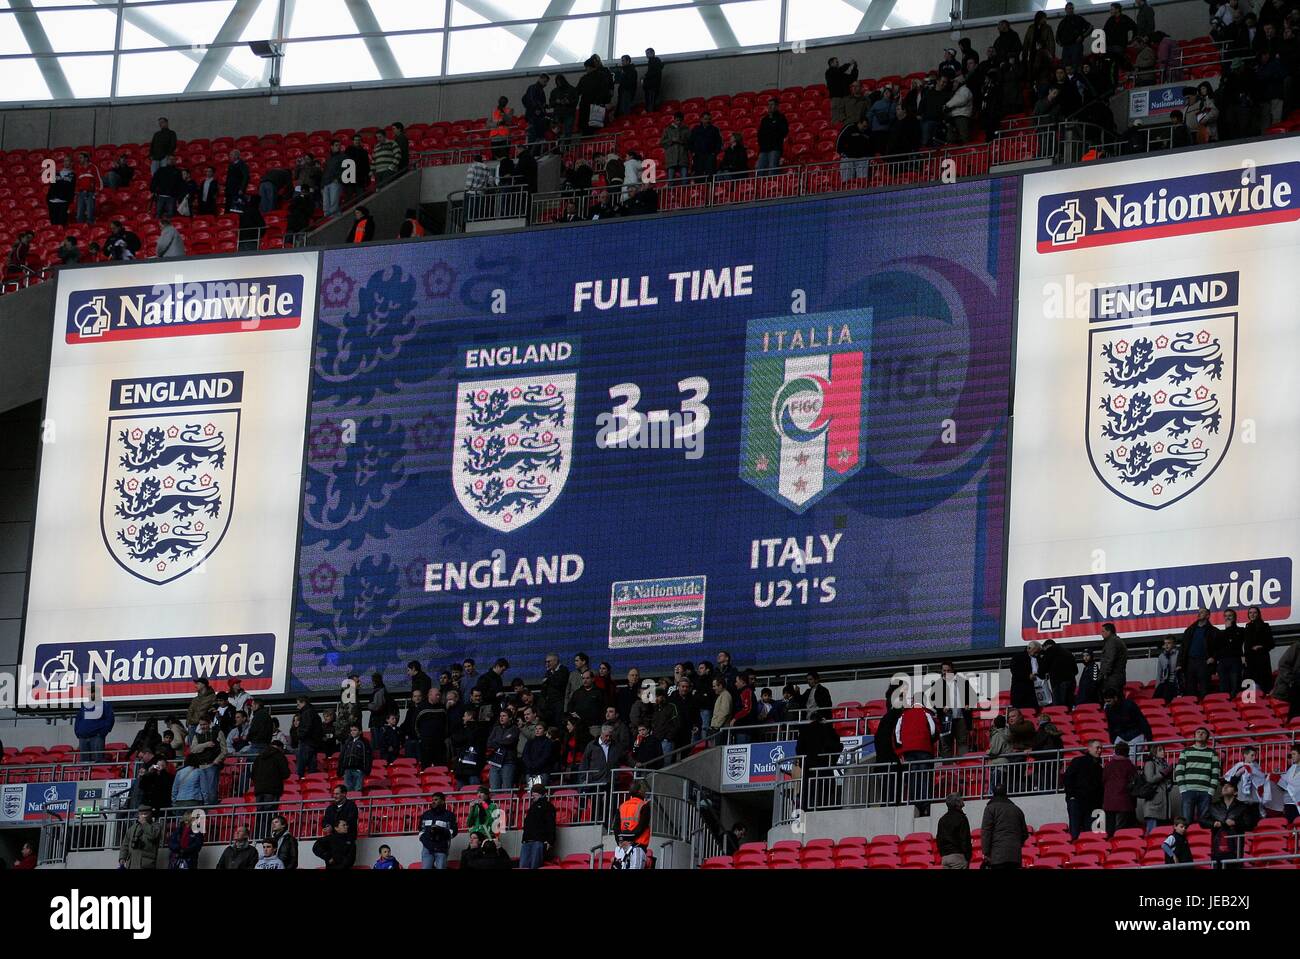 Latest England Football Scores and Results